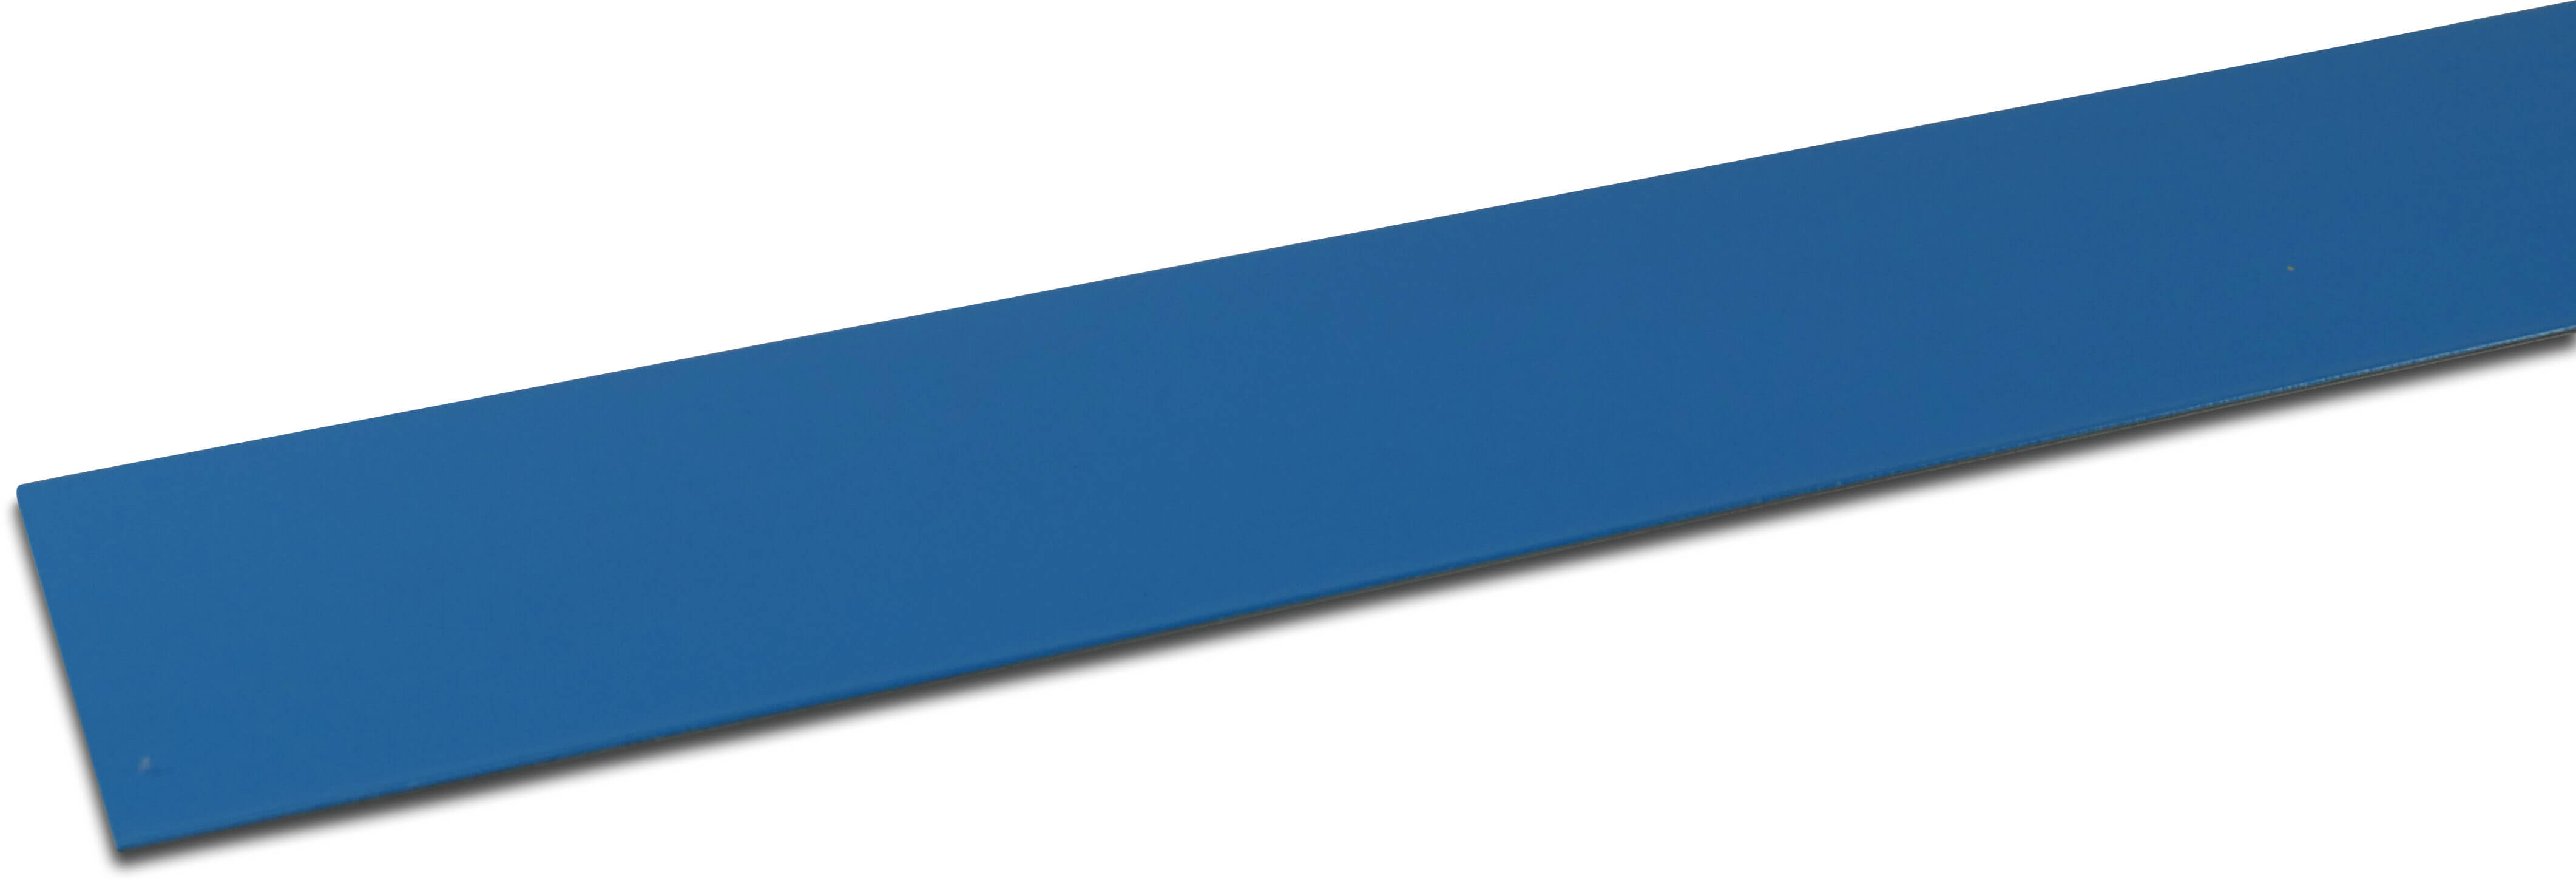 Elbe Profile PVC coated metal 70 mm x 30 mm x 2000 mm blue 2m type Interior angle